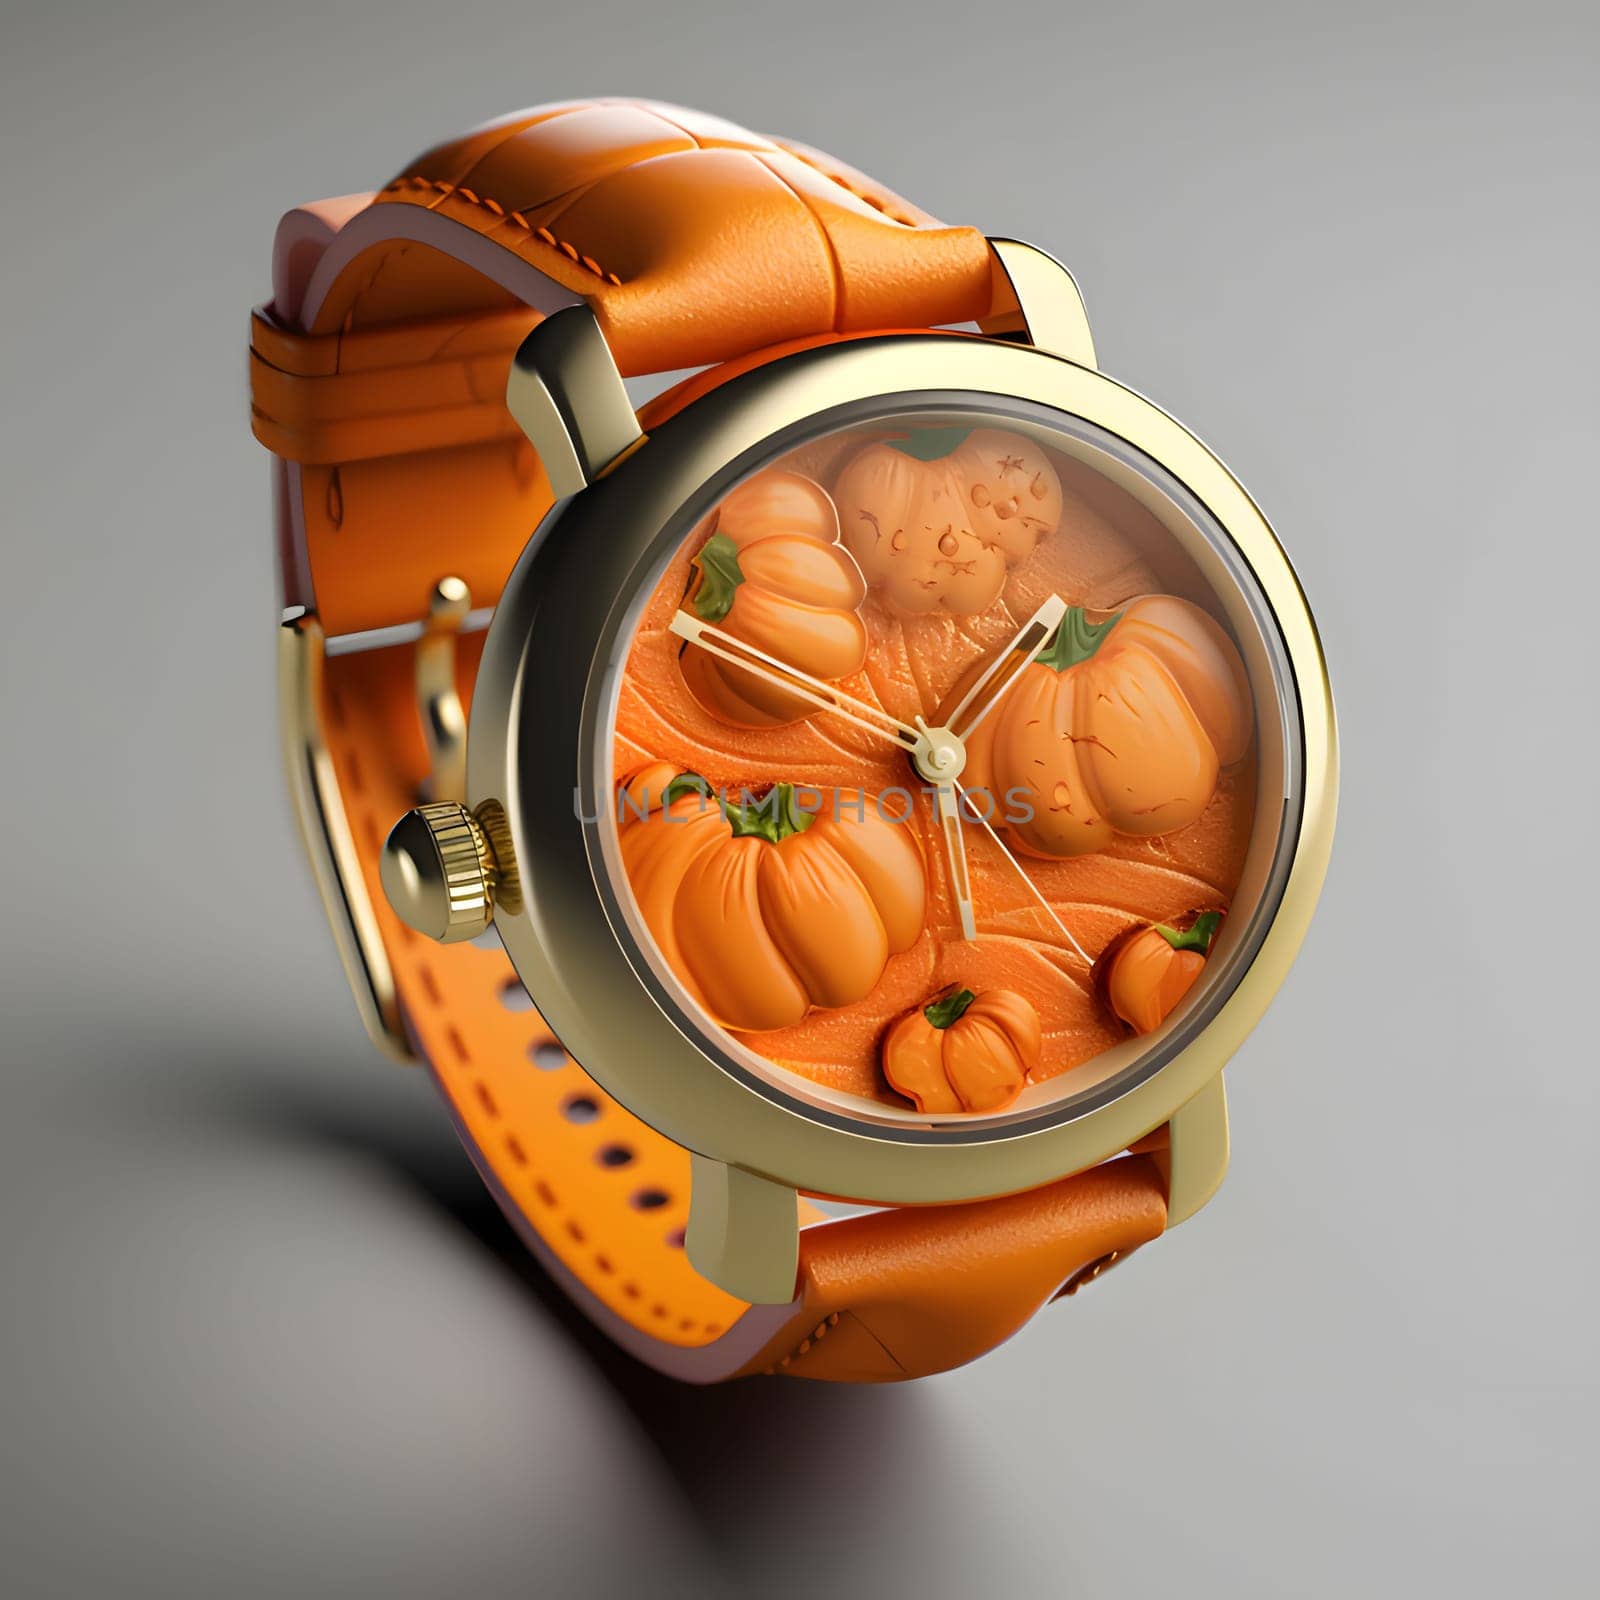 Smartwatch with pumpkin wallpaper on a bright isolated background. Pumpkin as a dish of thanksgiving for the harvest. by ThemesS